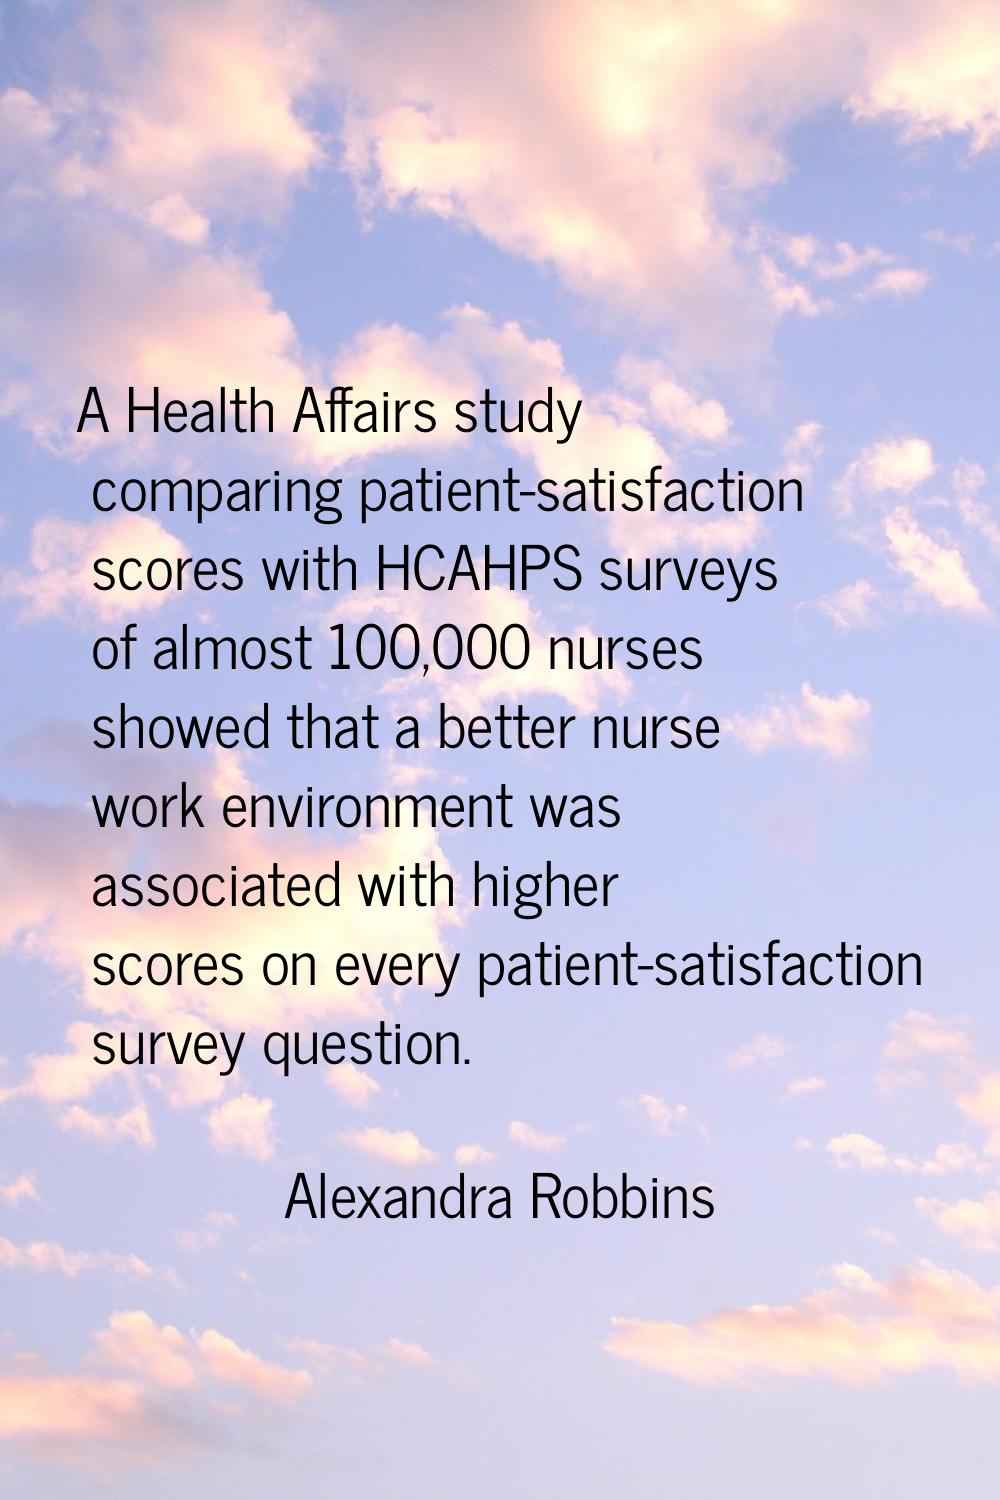 A Health Affairs study comparing patient-satisfaction scores with HCAHPS surveys of almost 100,000 